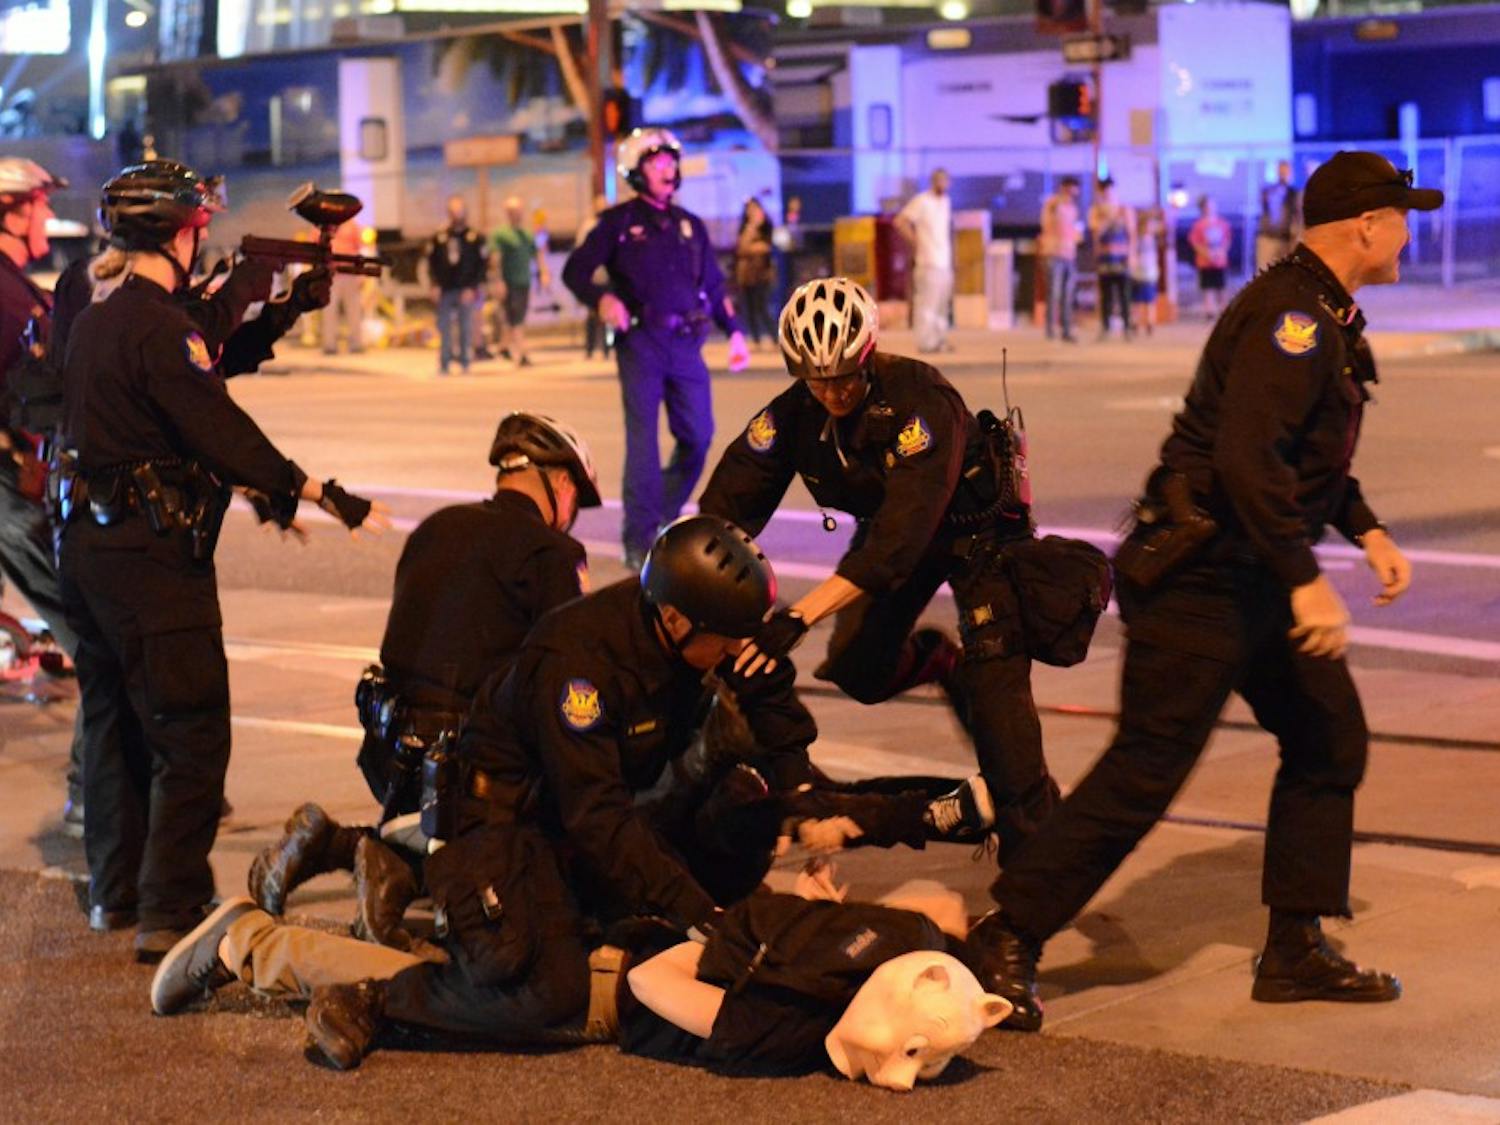 Police apprehend a protestor on Saturday night at Washington and First Street during the Downtown Zombie Walk on Saturday, Oct. 25, 2014.Wearing a pig mask, several police officers subdue the protestor. (Photo by Jonathan Williams)